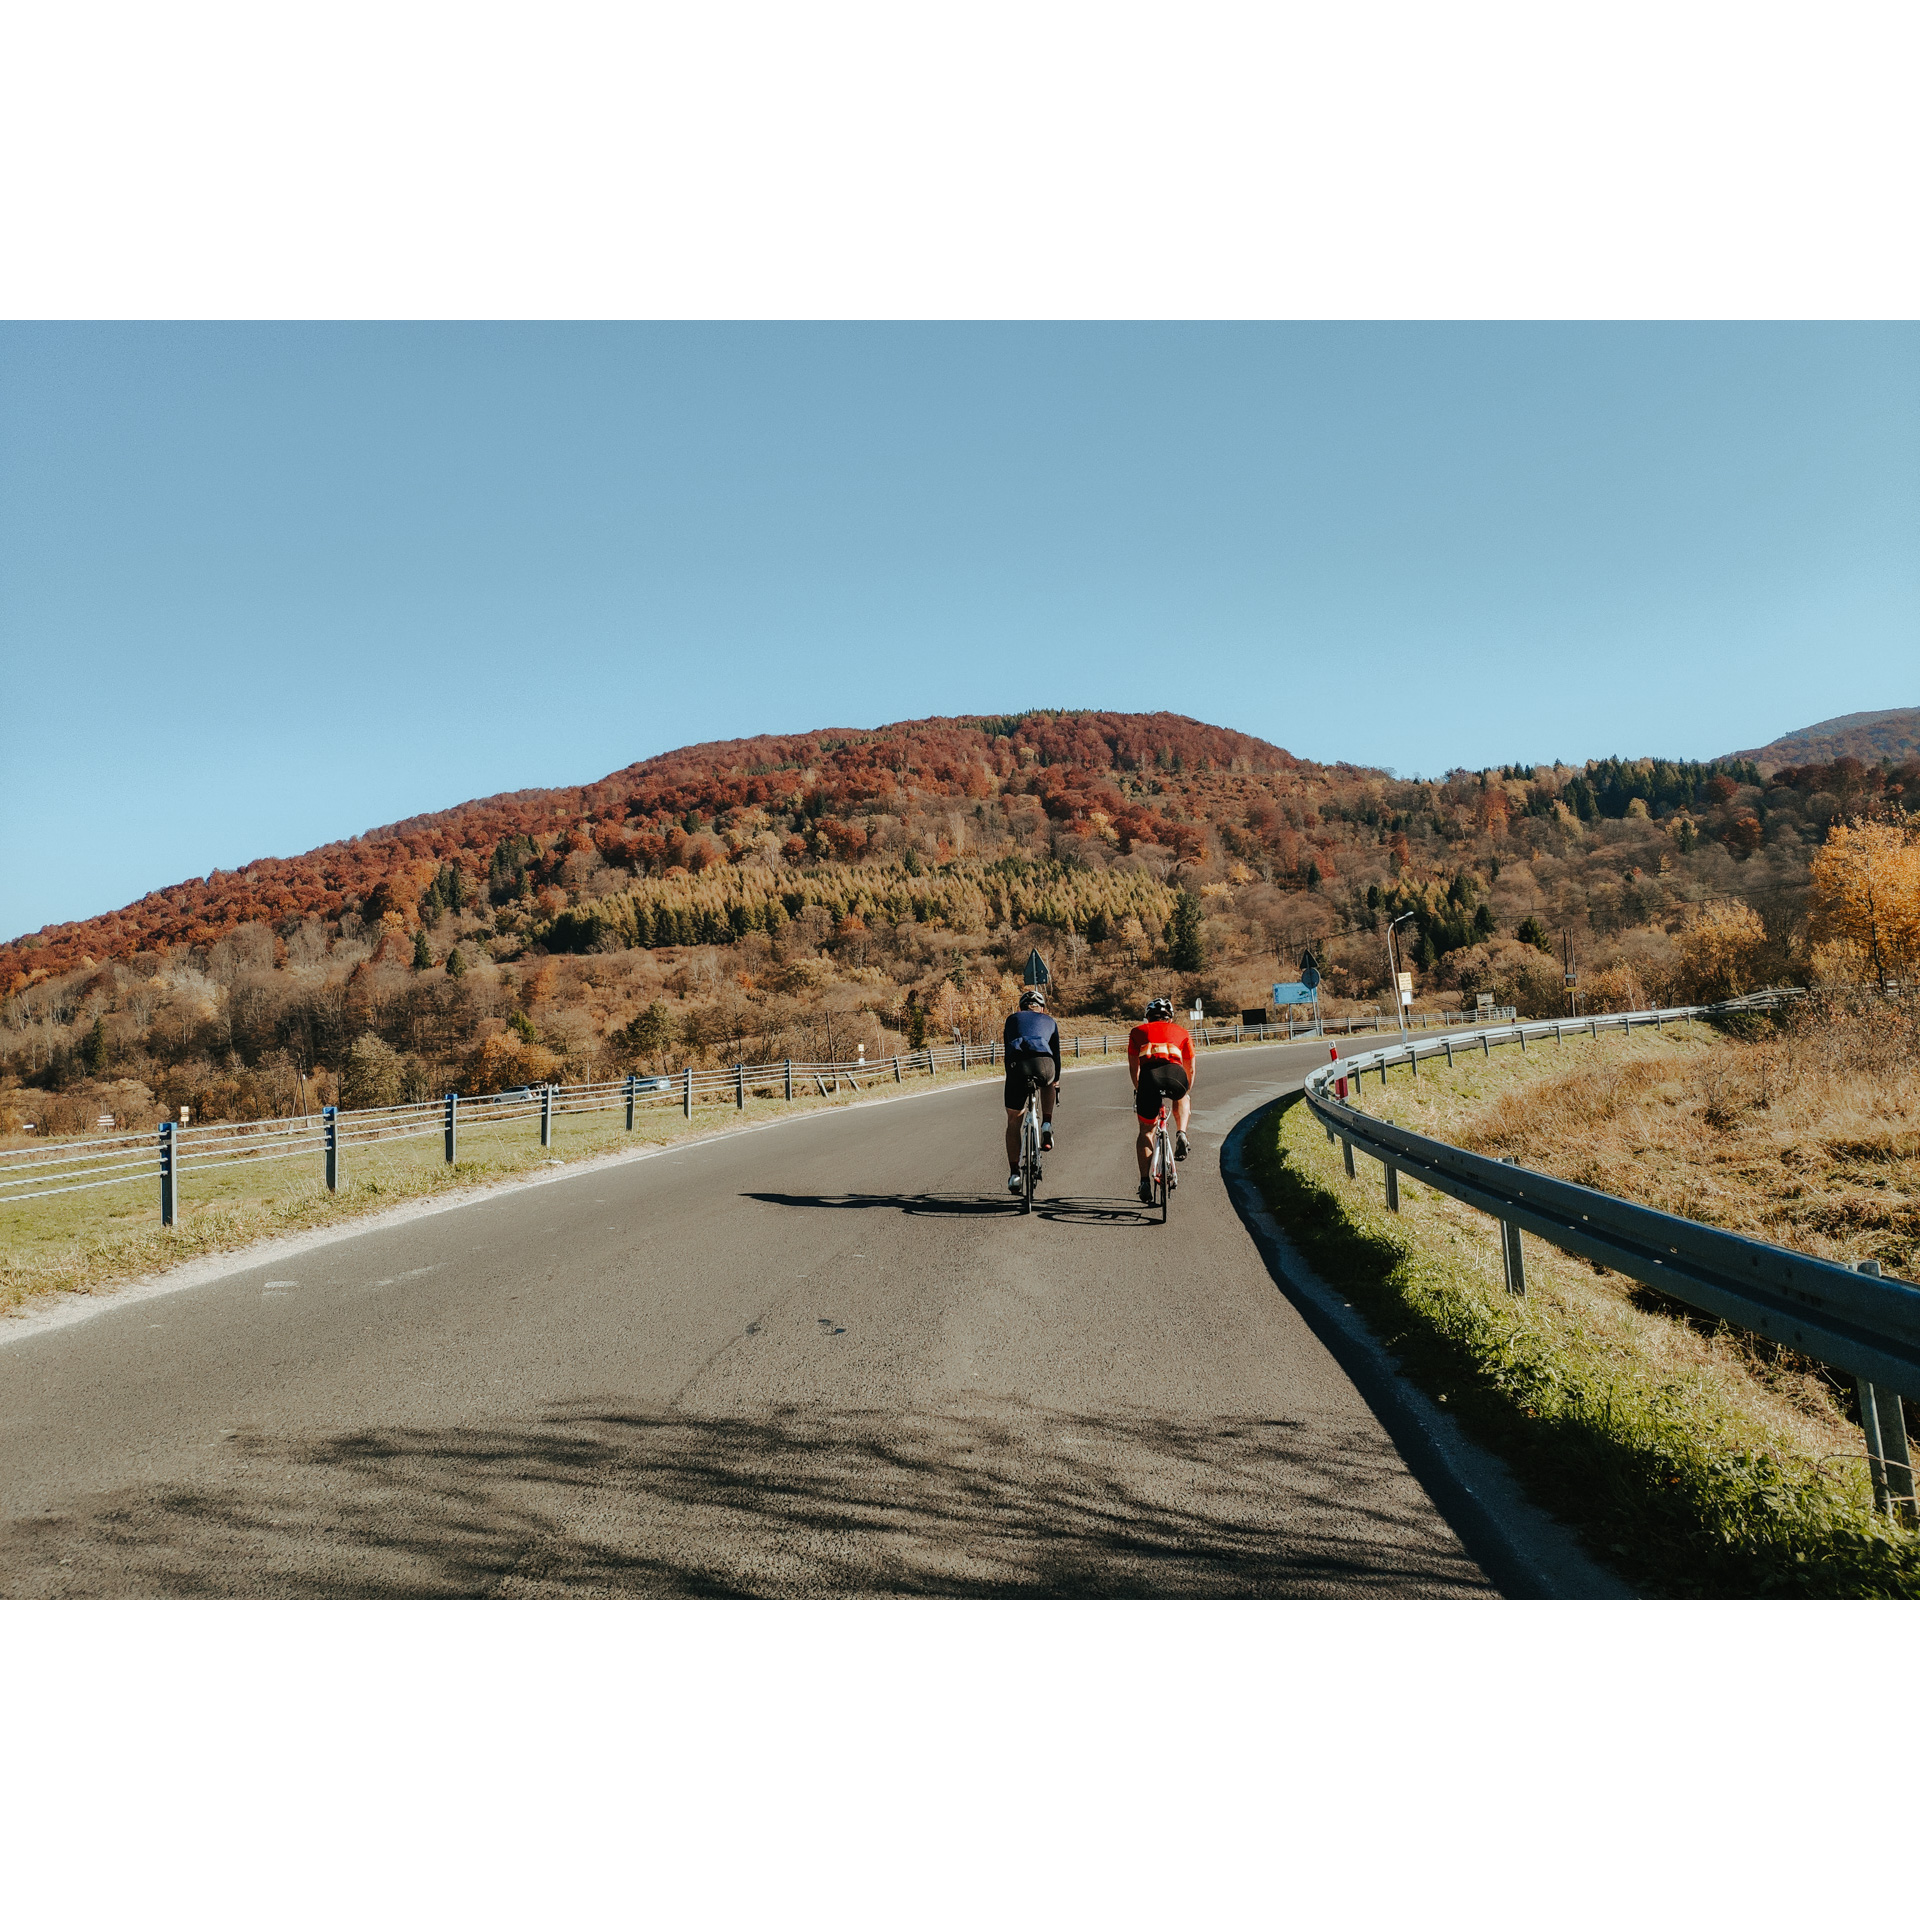 A man dressed in red and a man dressed in blue riding on an asphalt road against the backdrop of a forested mountain with autumn colors